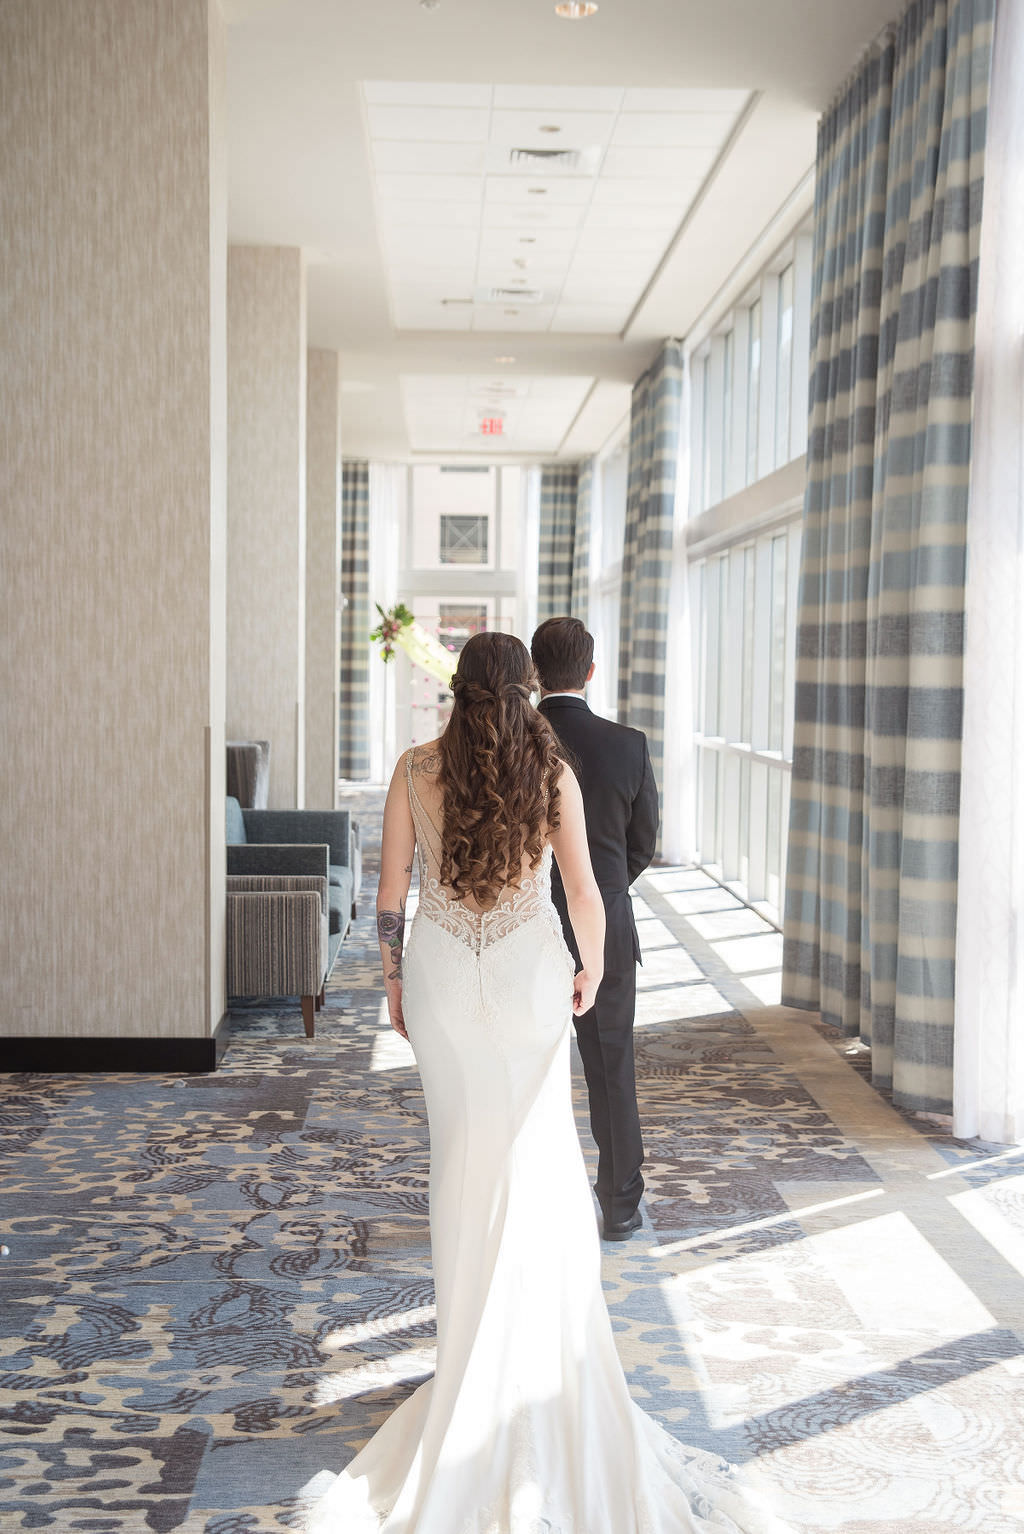 Florida Bride and Groom First Look Wedding Portrait |Tampa Bay Wedding Photographer Kristen Marie Photography | Hotel Wedding Venue Hyatt Place Downtown St. Pete | Wedding Attire Nikki's Glitz and Glam Boutique | Wedding Hair and Makeup LDM Beauty Group